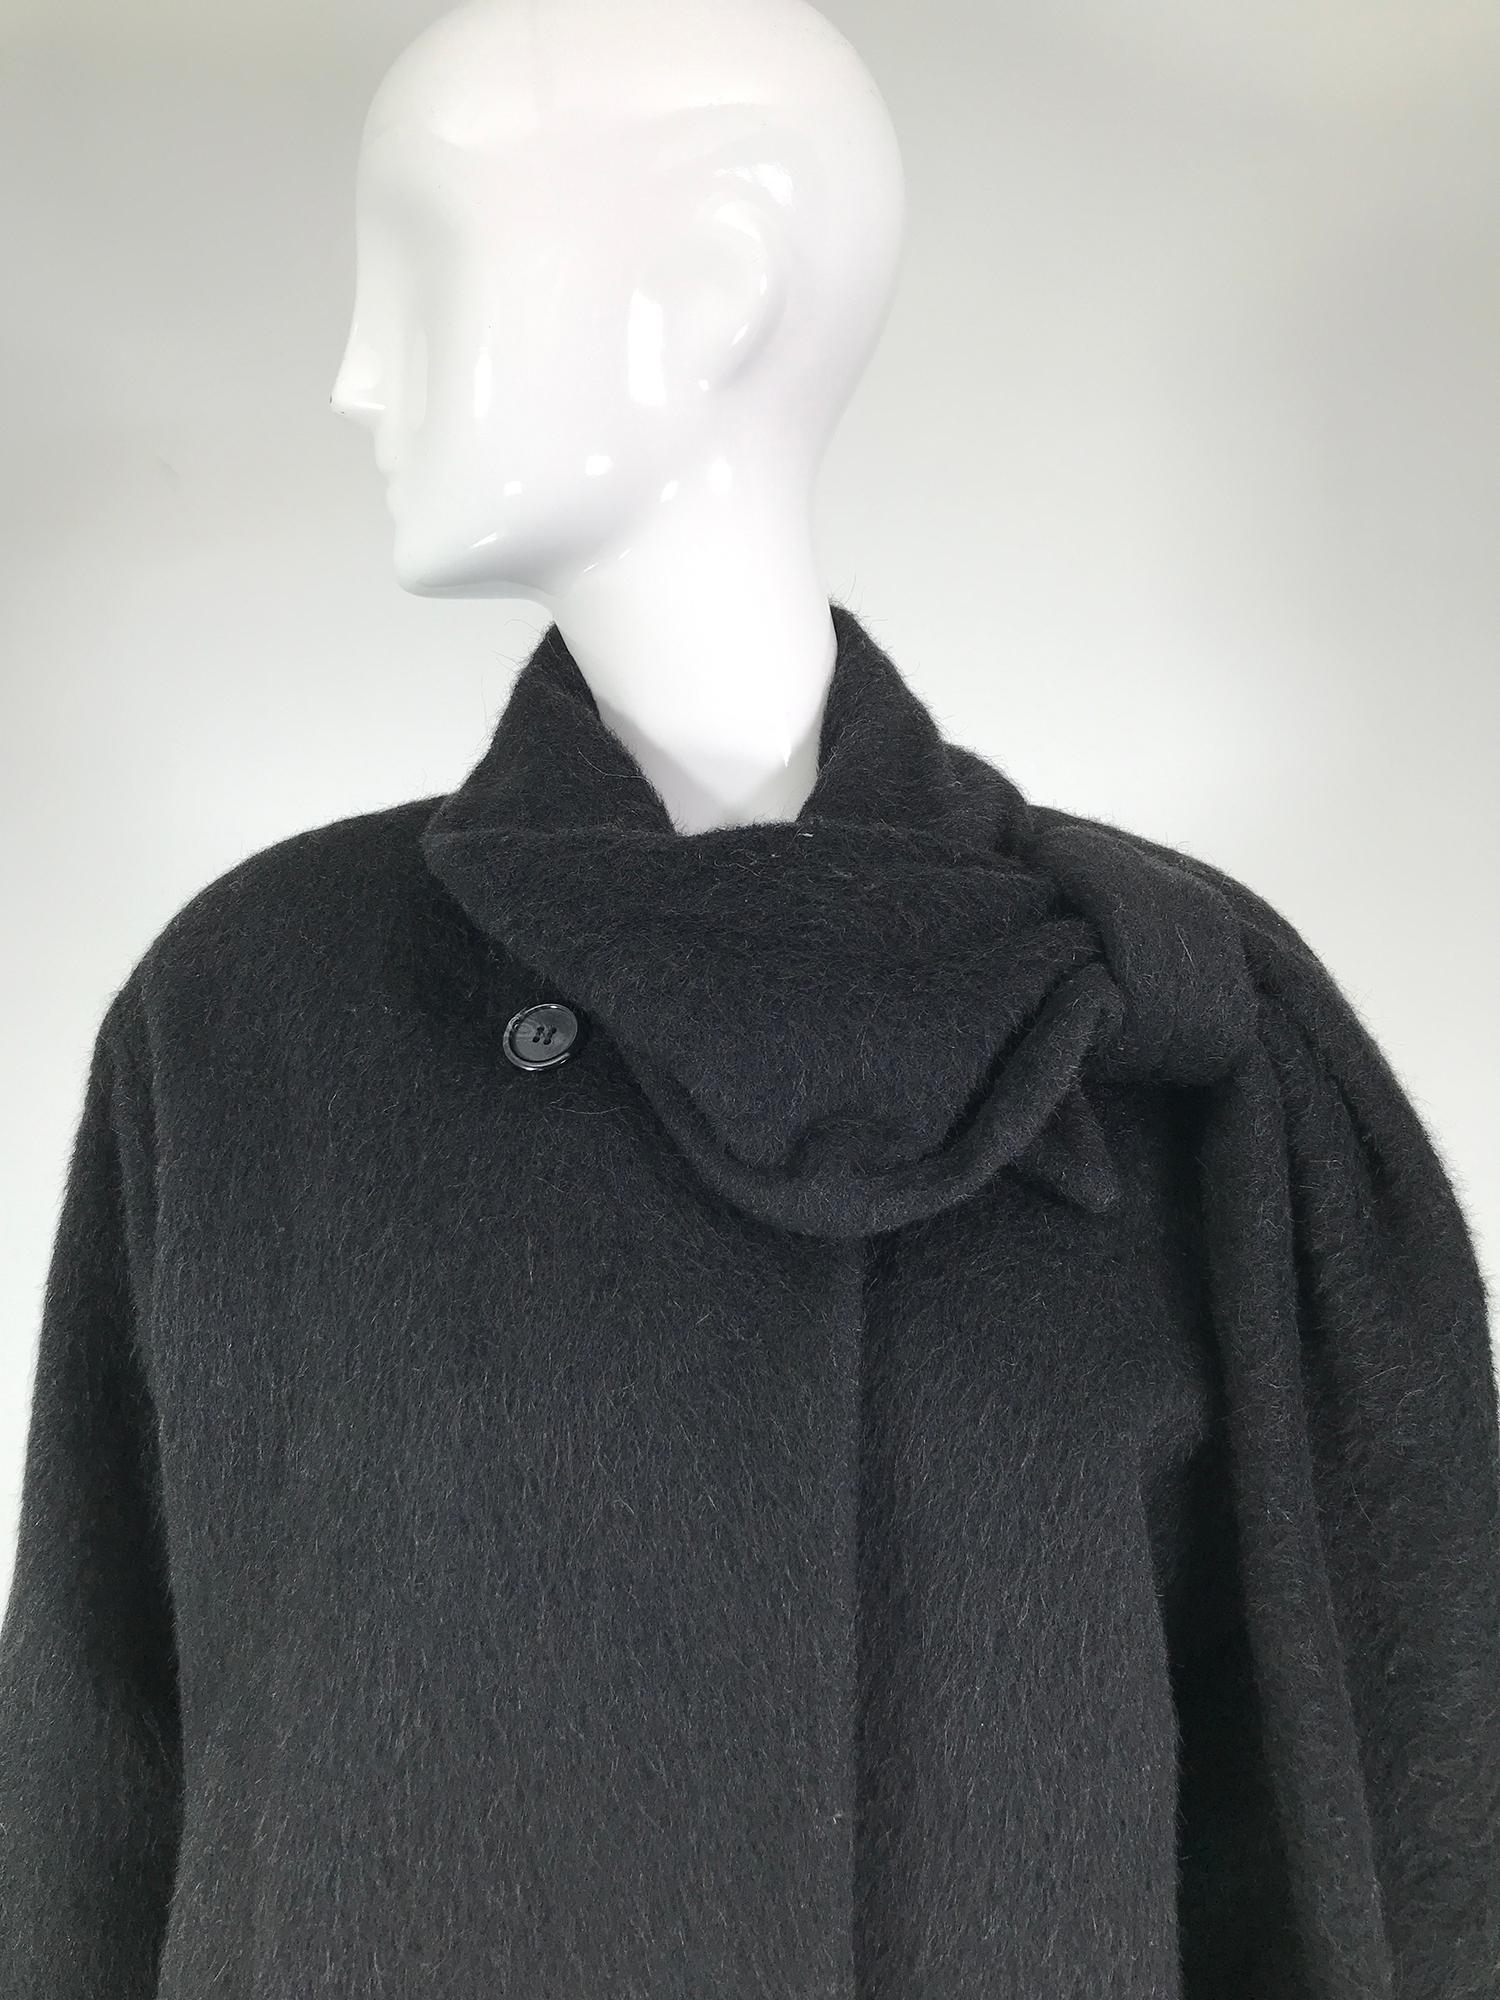 Christian Dior Charcoal Grey Mohair & Wool Winter Coat 1980s For Sale 2